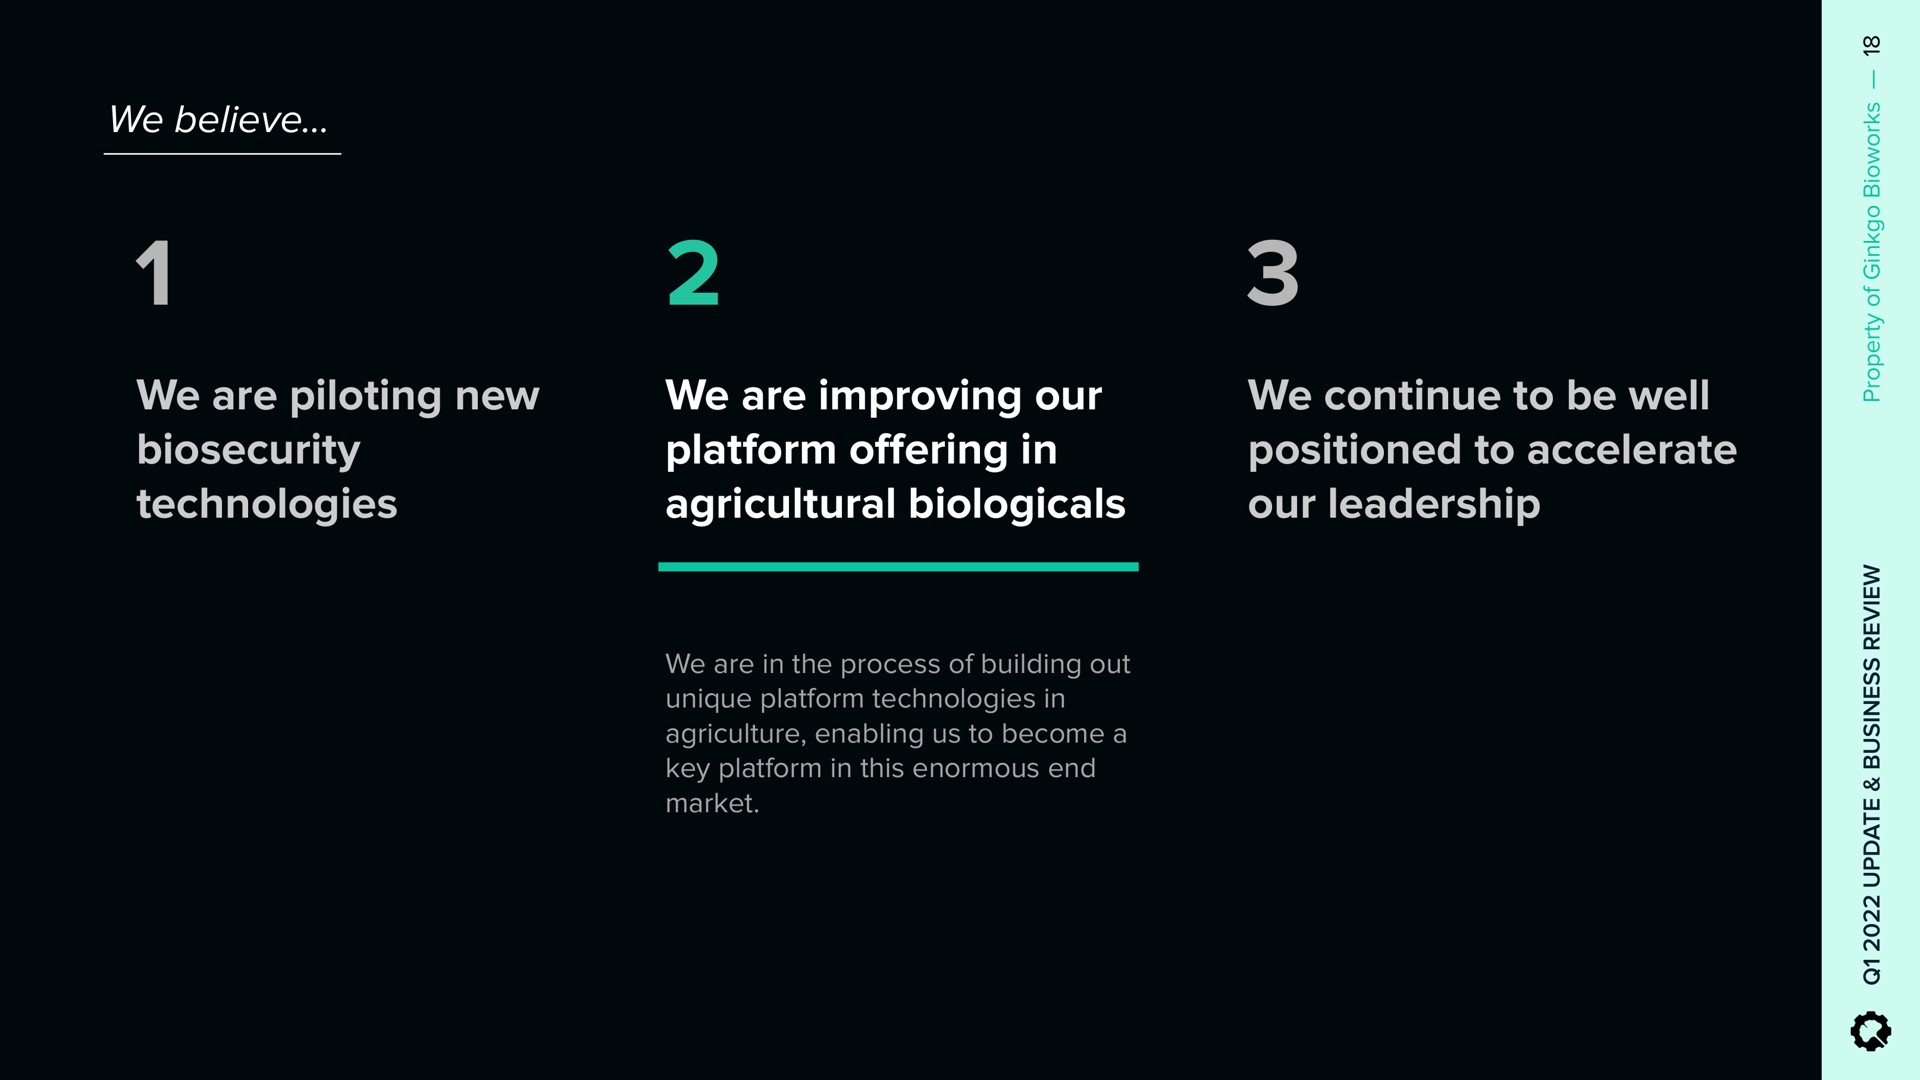 we are piloting new technologies we are improving our platform in agricultural we continue to be well positioned to accelerate our leadership i offering | Ginkgo